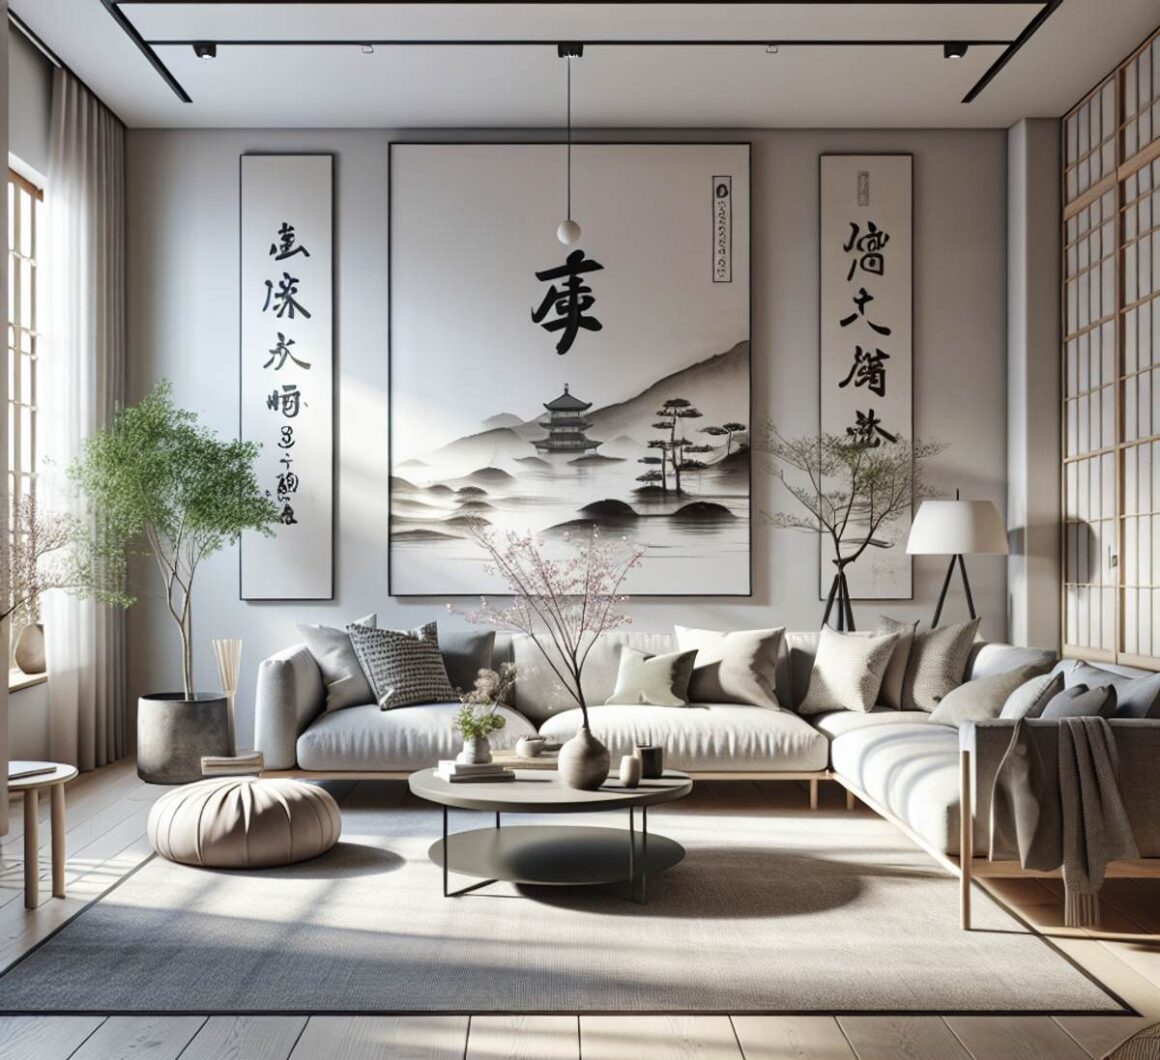 A living room with low-profile couches, clean lines, and natural materials, combining Japanese and Scandinavian design aesthetics.